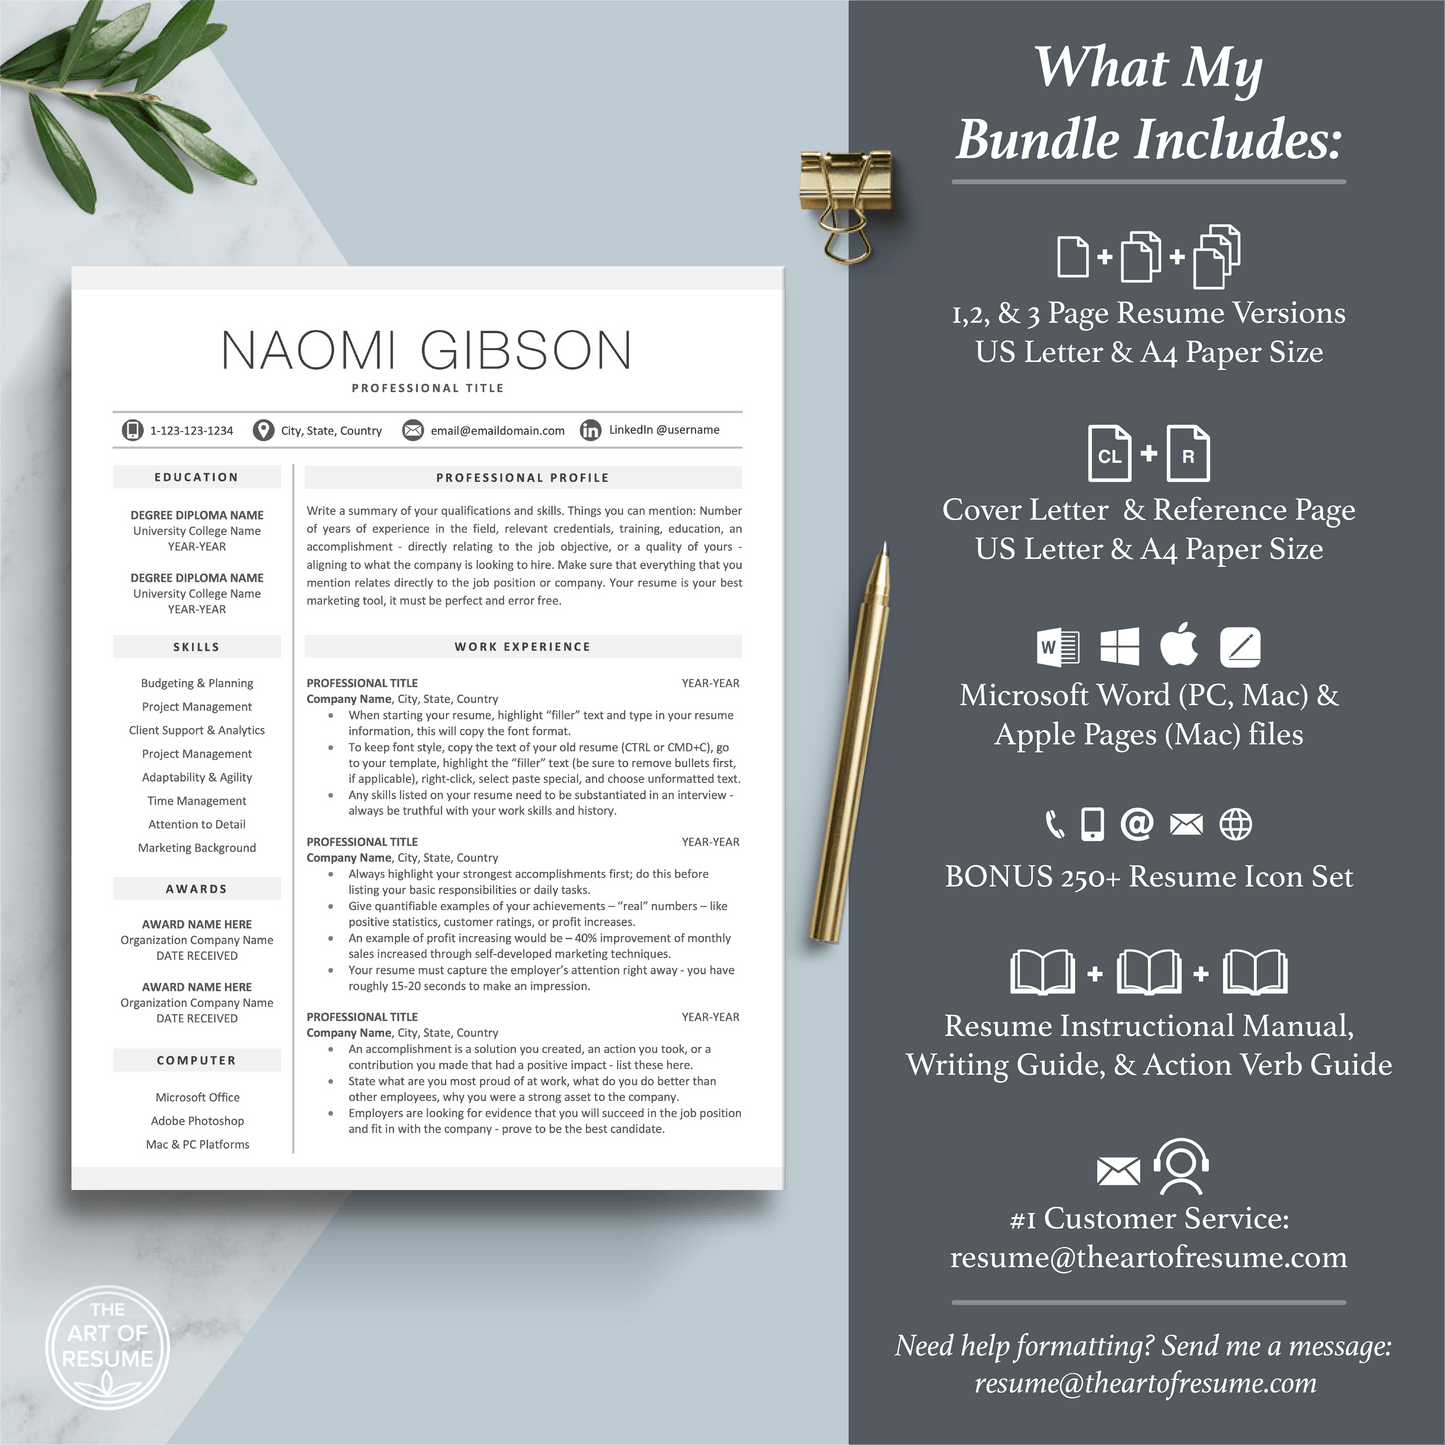 The Art of Resume Templates |  Professional Minimalist Simple Resume CV Template Includes 3 Editable Resume Templates, Cover Letter, Reference Page, Mac, PC, A4 Paper, US size, Free Guide, The Art of Resume Writing, 250 Bonus Resume Icons